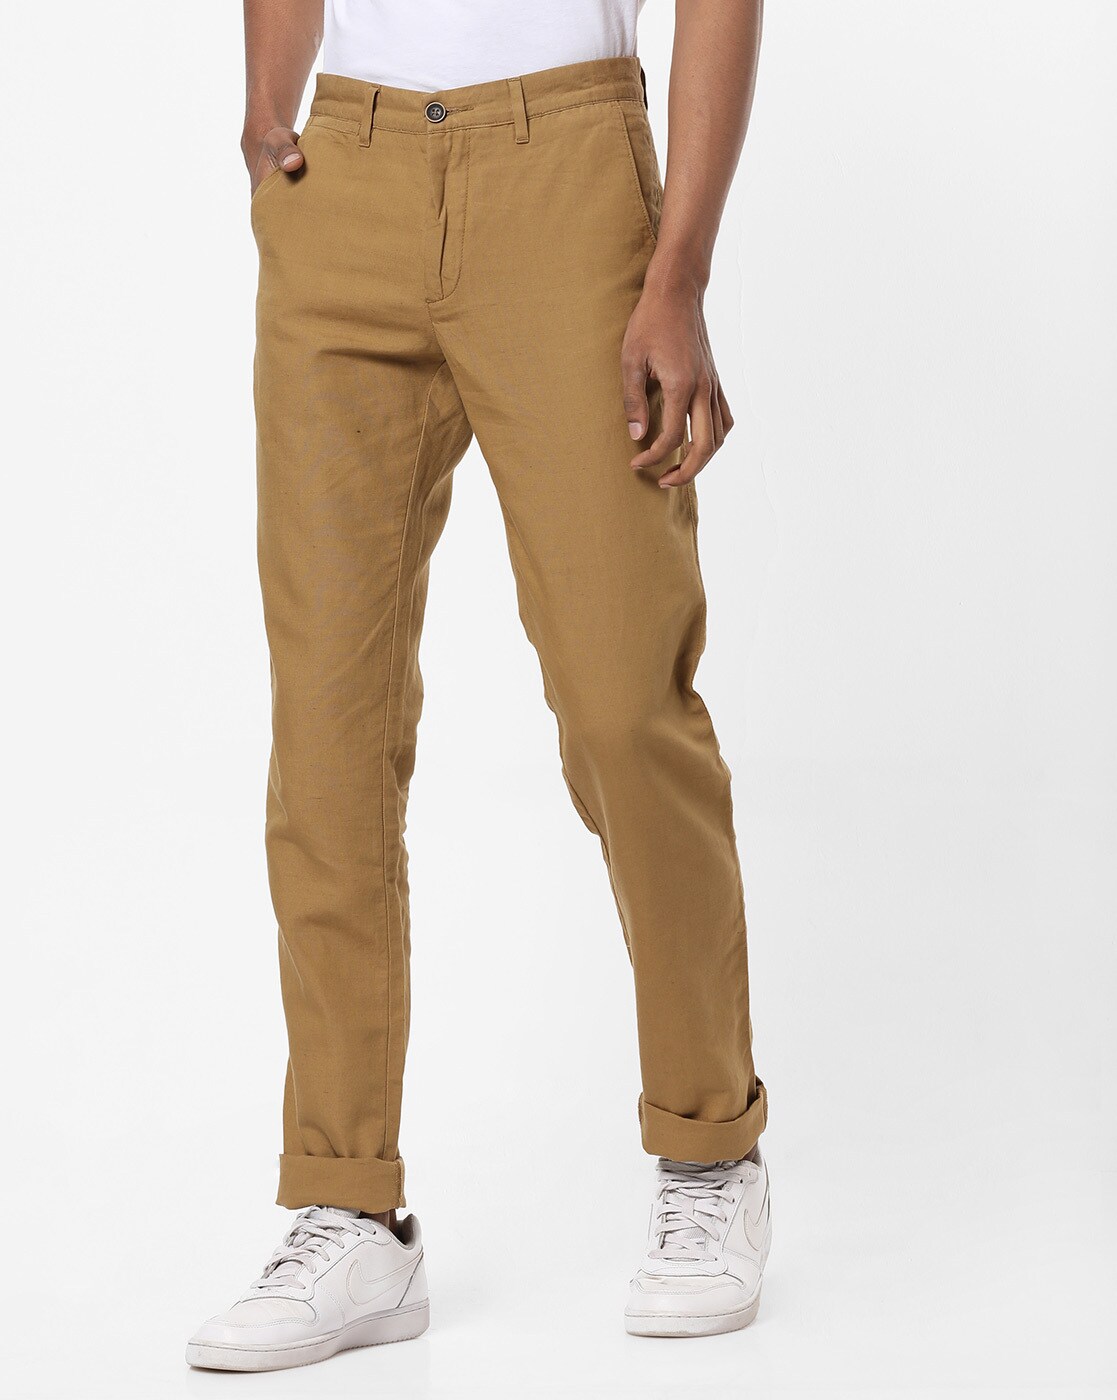 Buy Blue Trousers  Pants for Men by PETER ENGLAND Online  Ajiocom